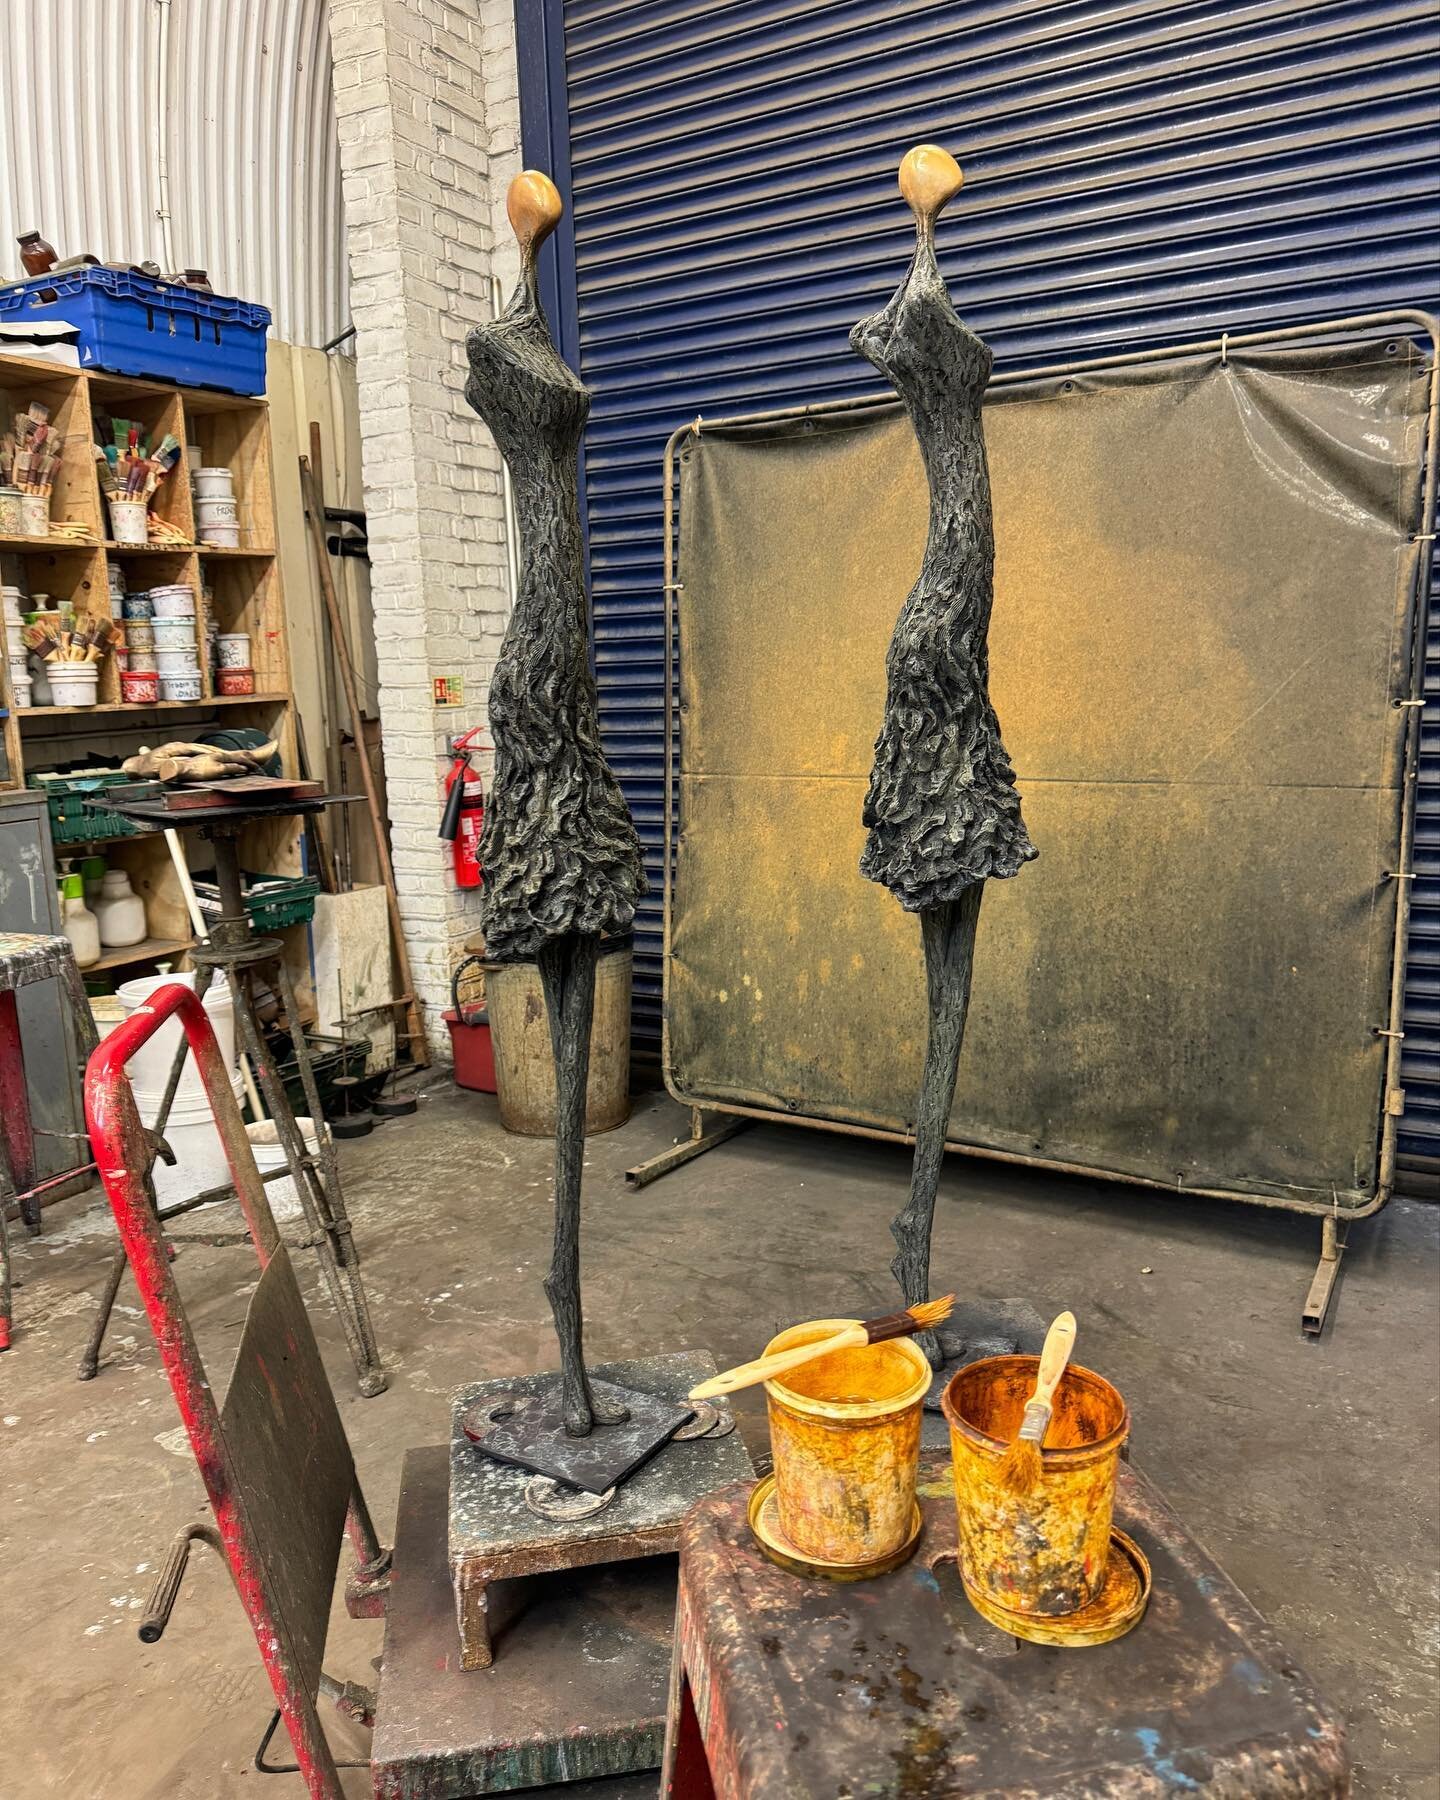 Rhythm in the studio before they arrive at their new home

#studio #sculpture #bronzesculpture #artist #sculpt #figurativeart #dancer #artcollection